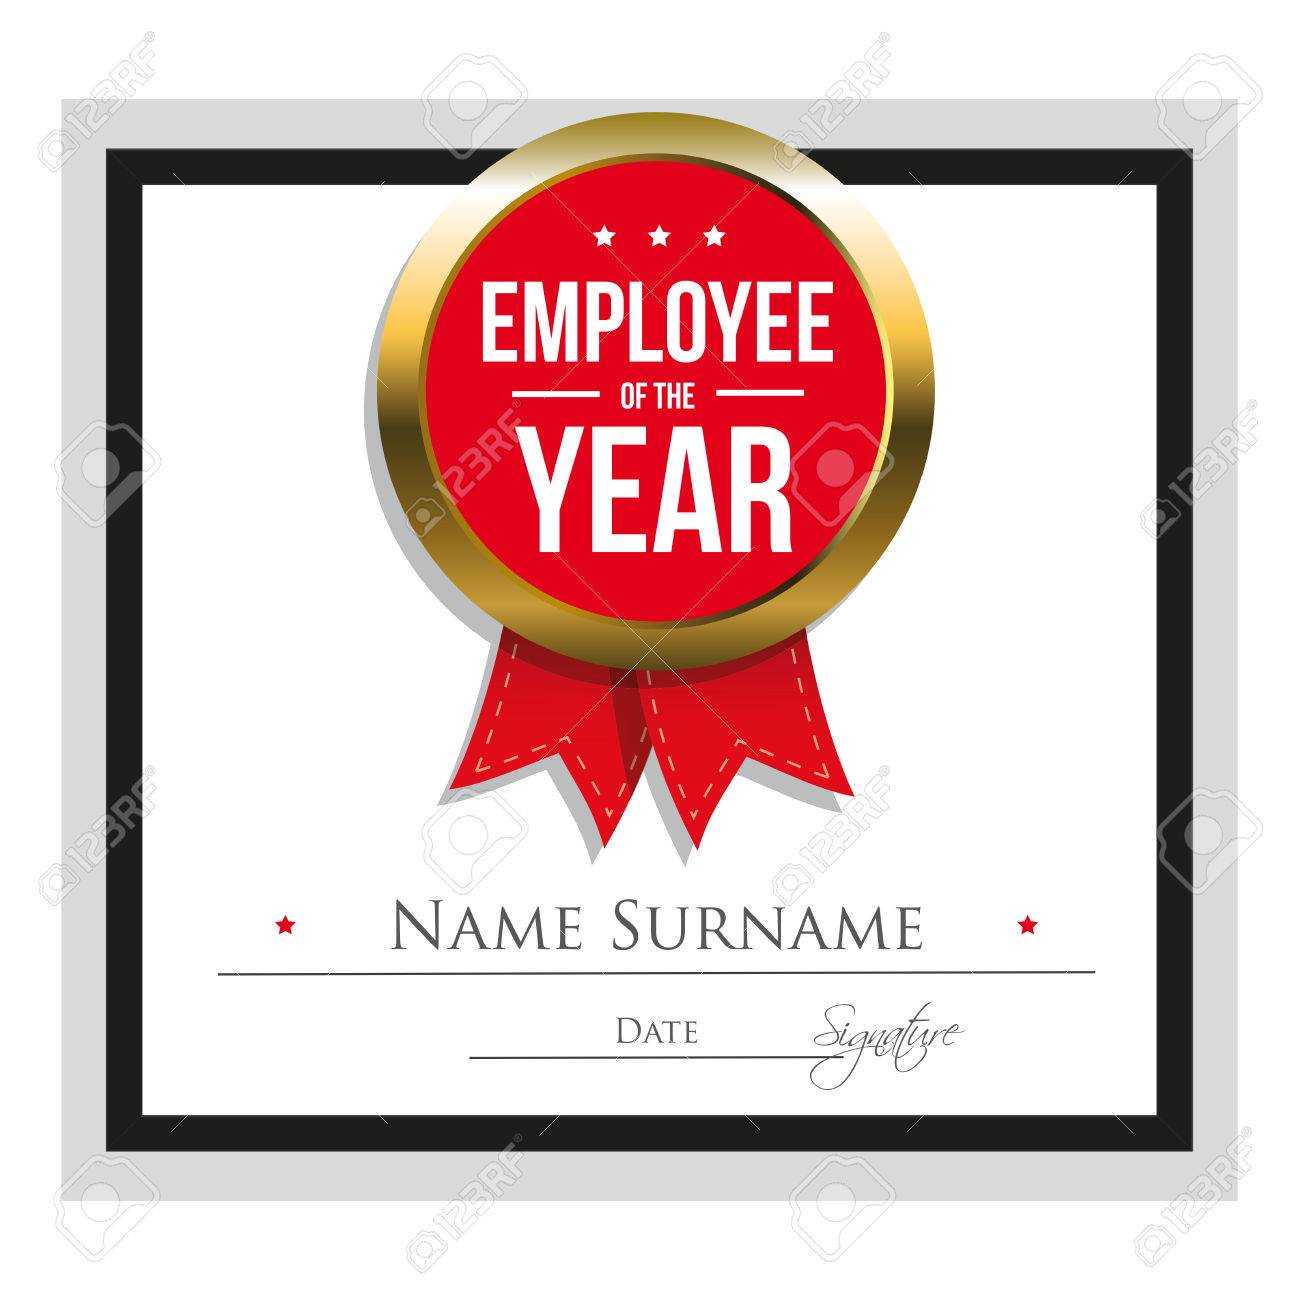 Employee Of The Year Certificate Template Regarding Employee Of The Year Certificate Template Free